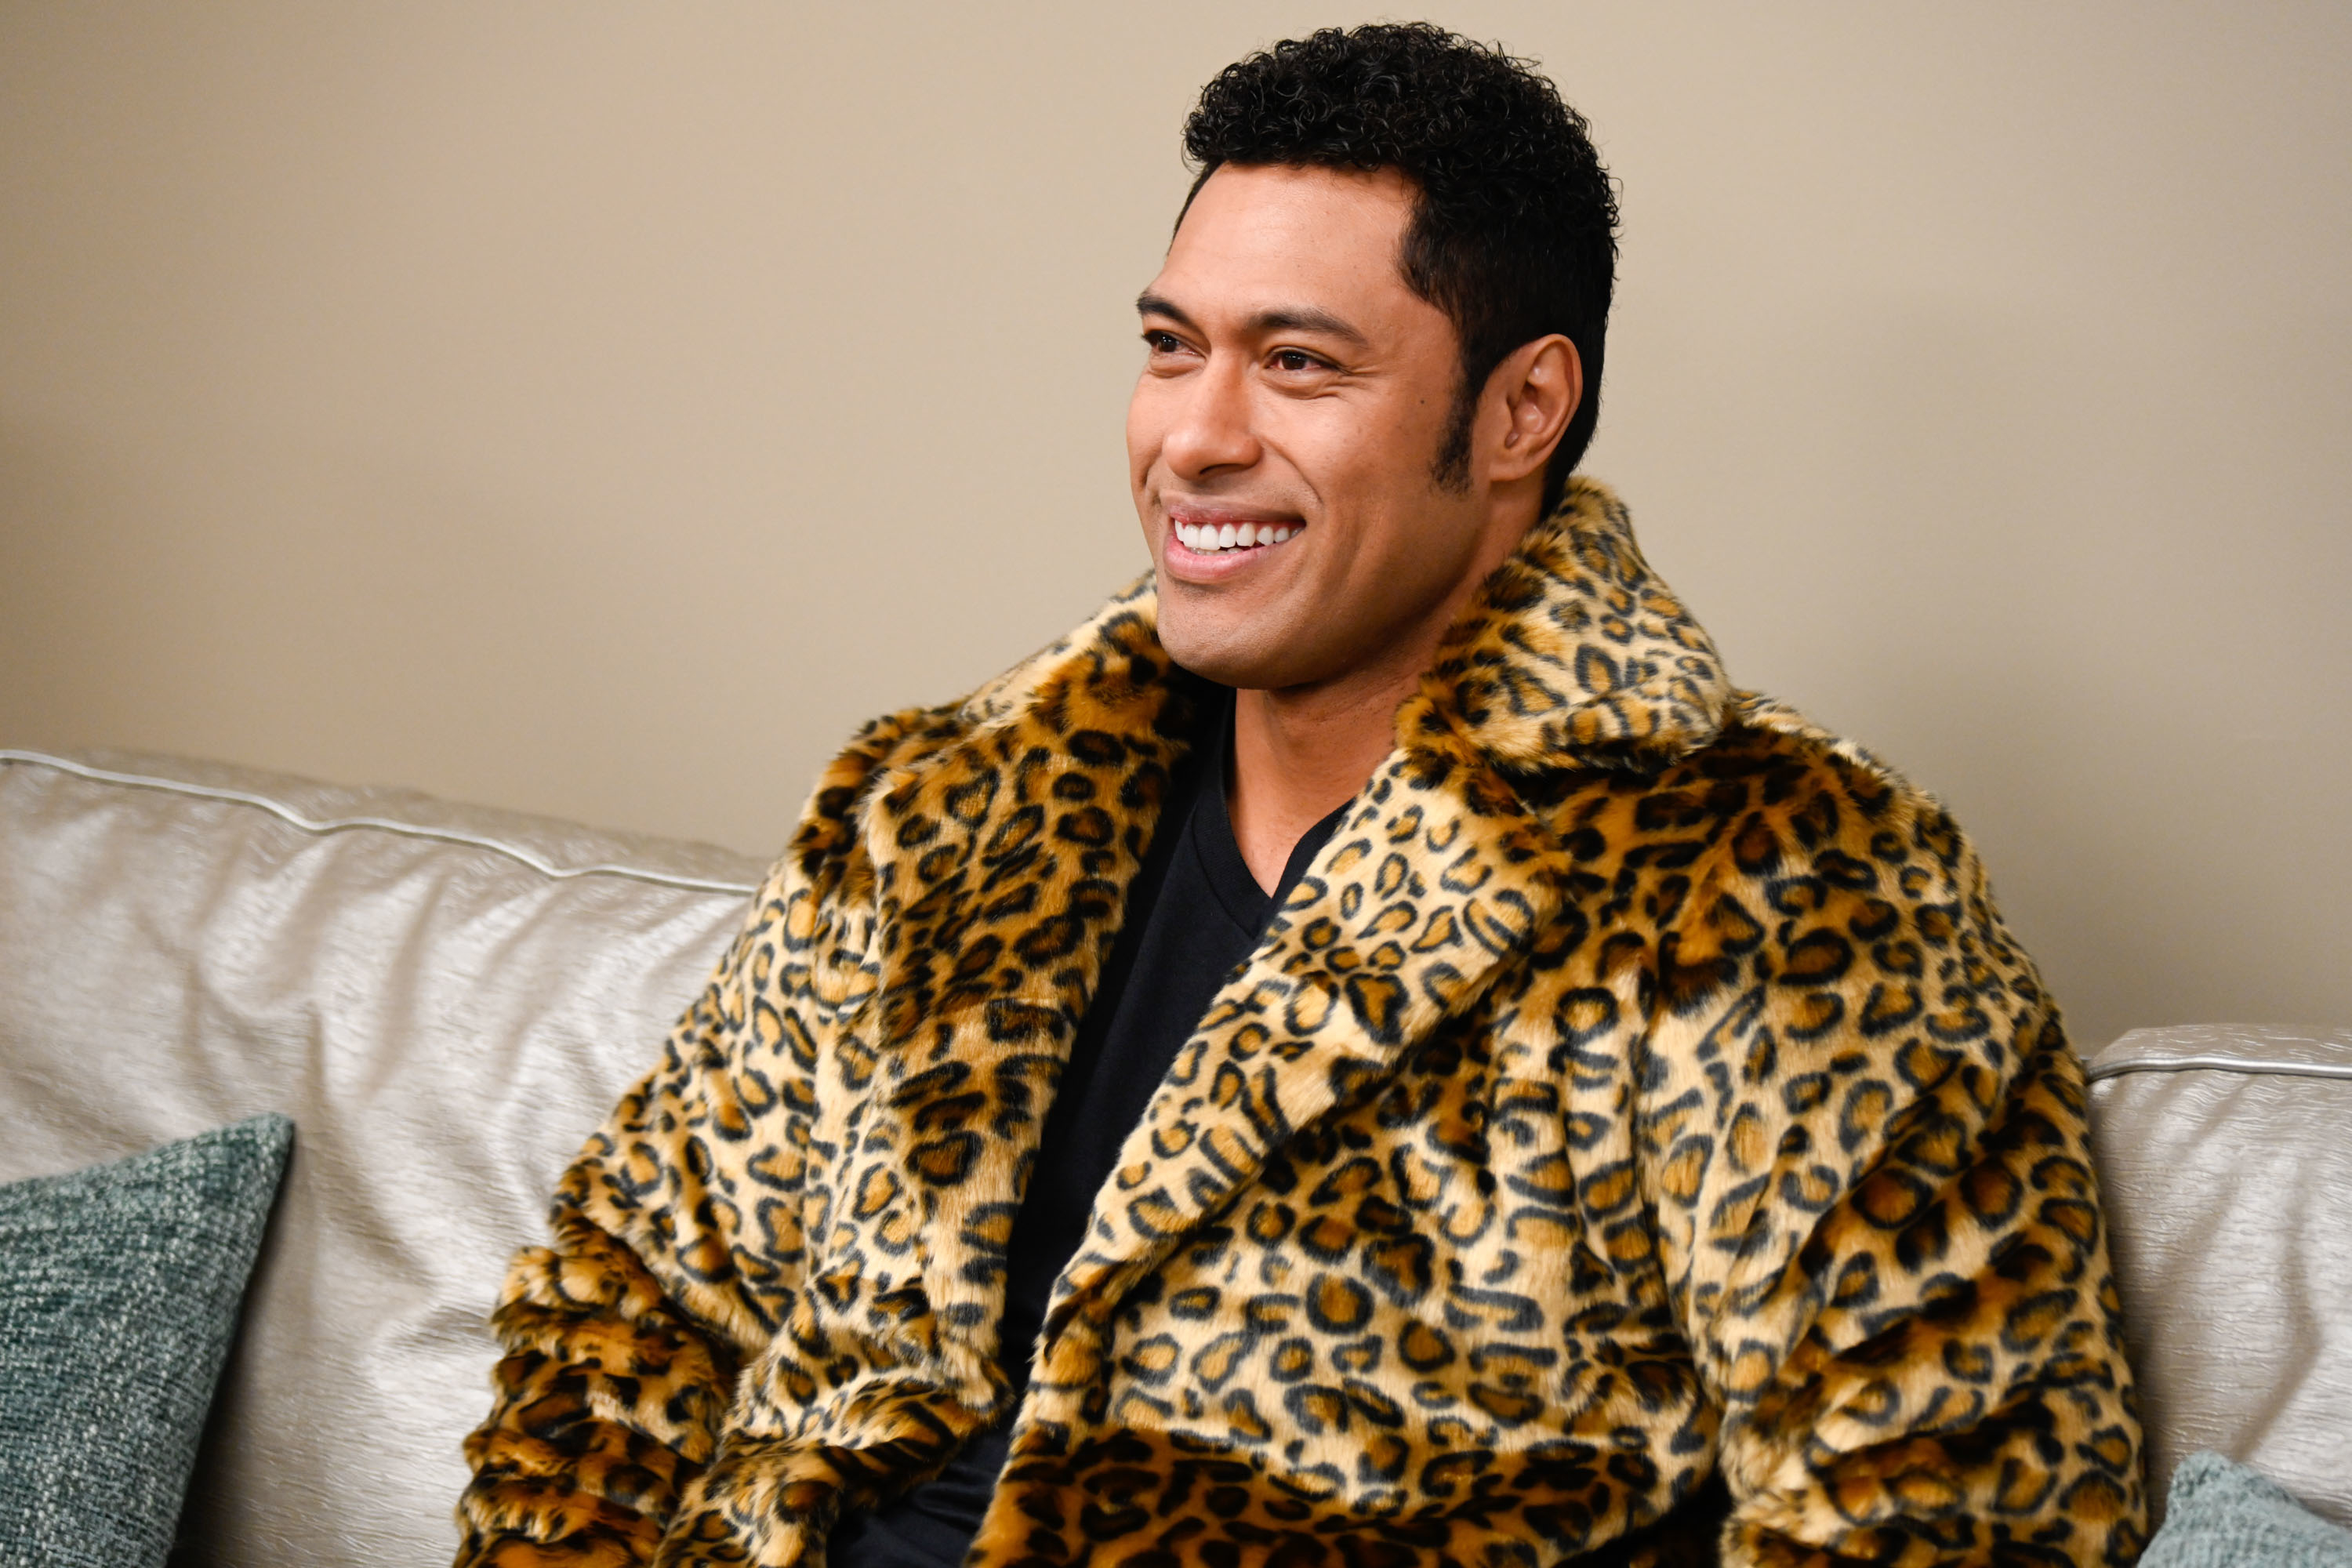 Uli Latukefu in a leopard jacket as Dwayne Johnson in a scene from &quot;Young Rock&quot;